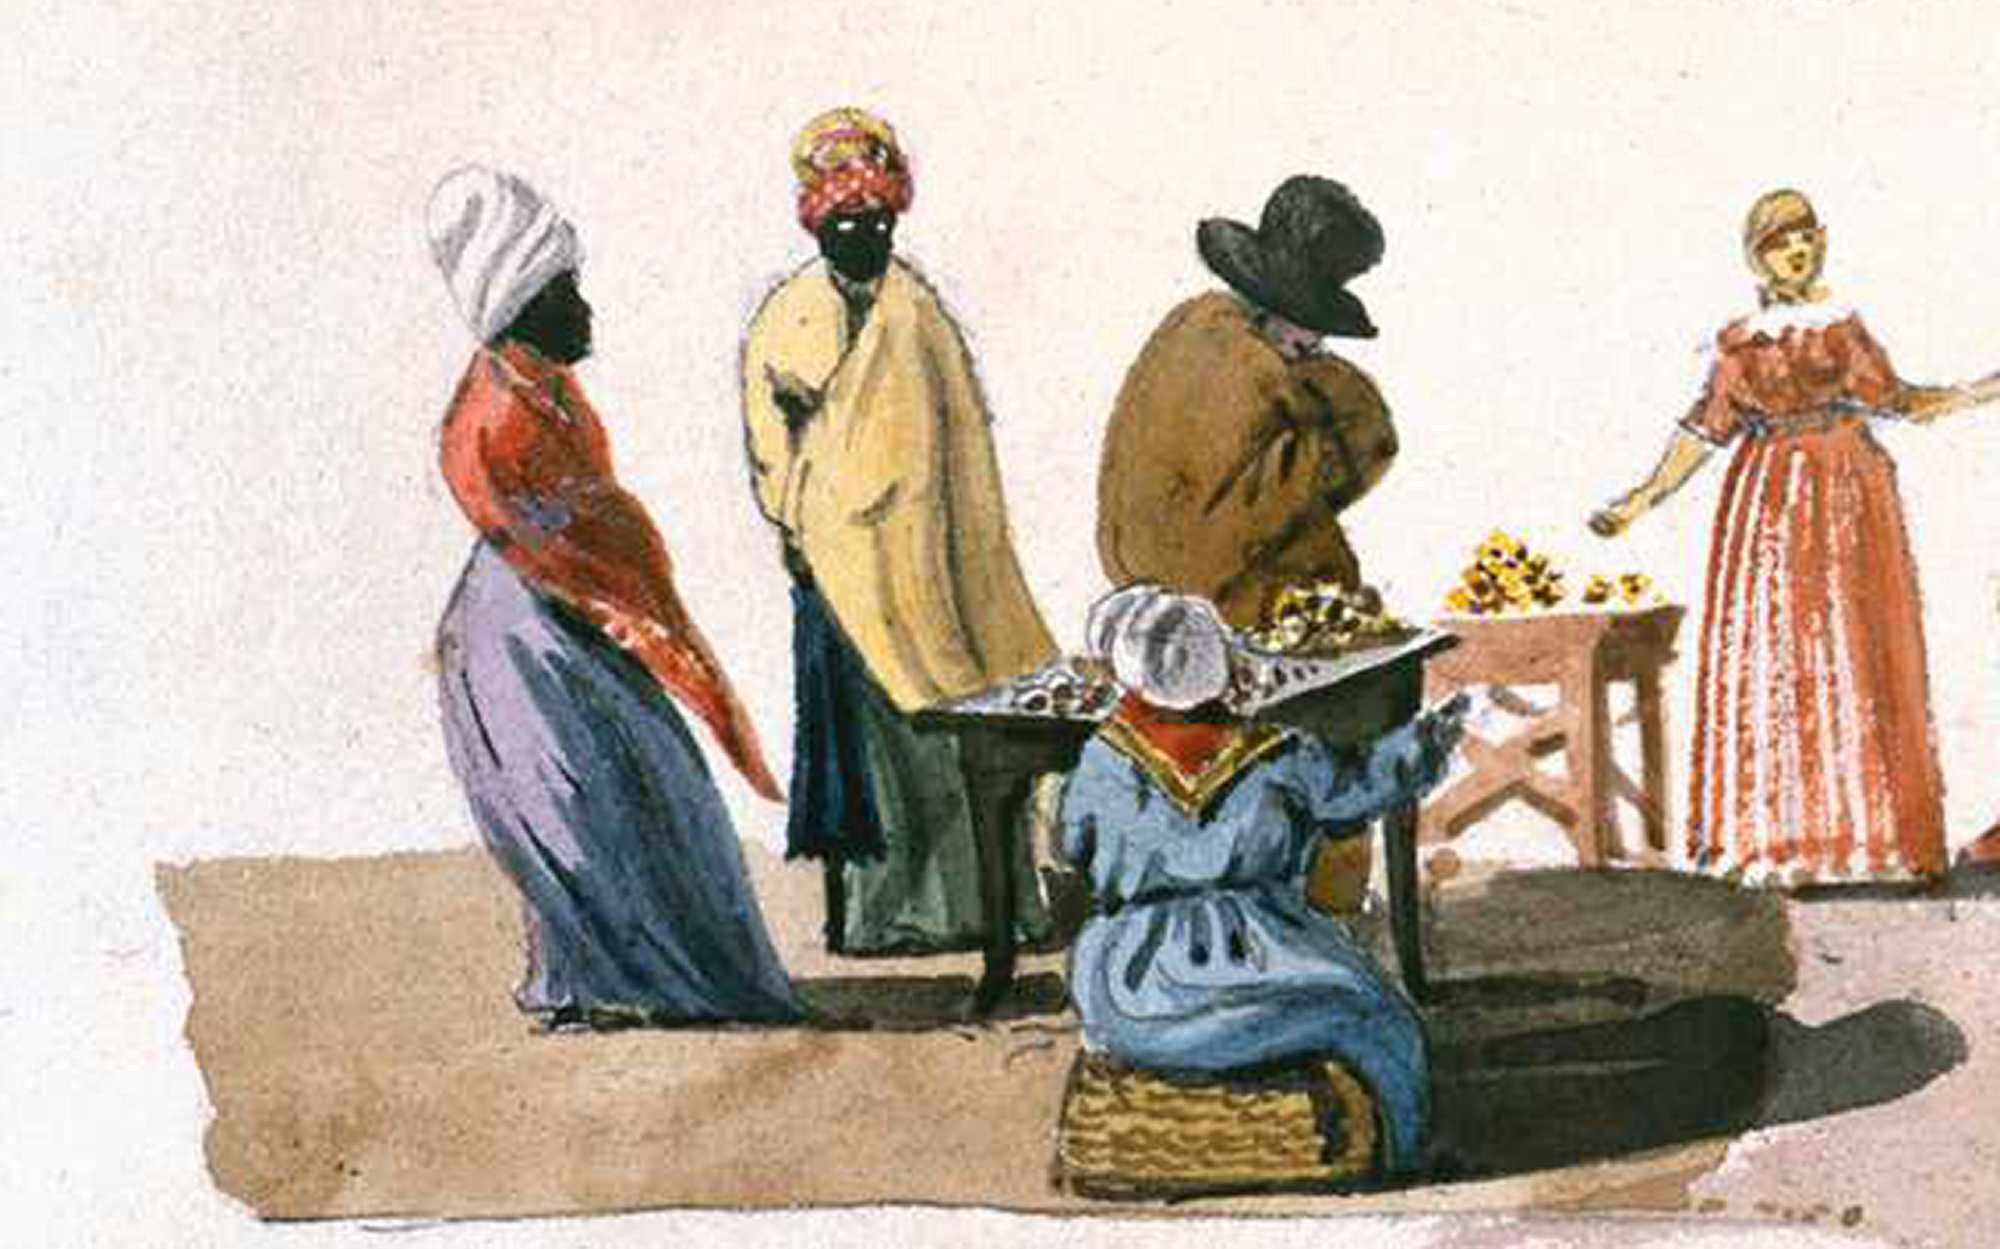 Watercolor painting of different merchants at a market